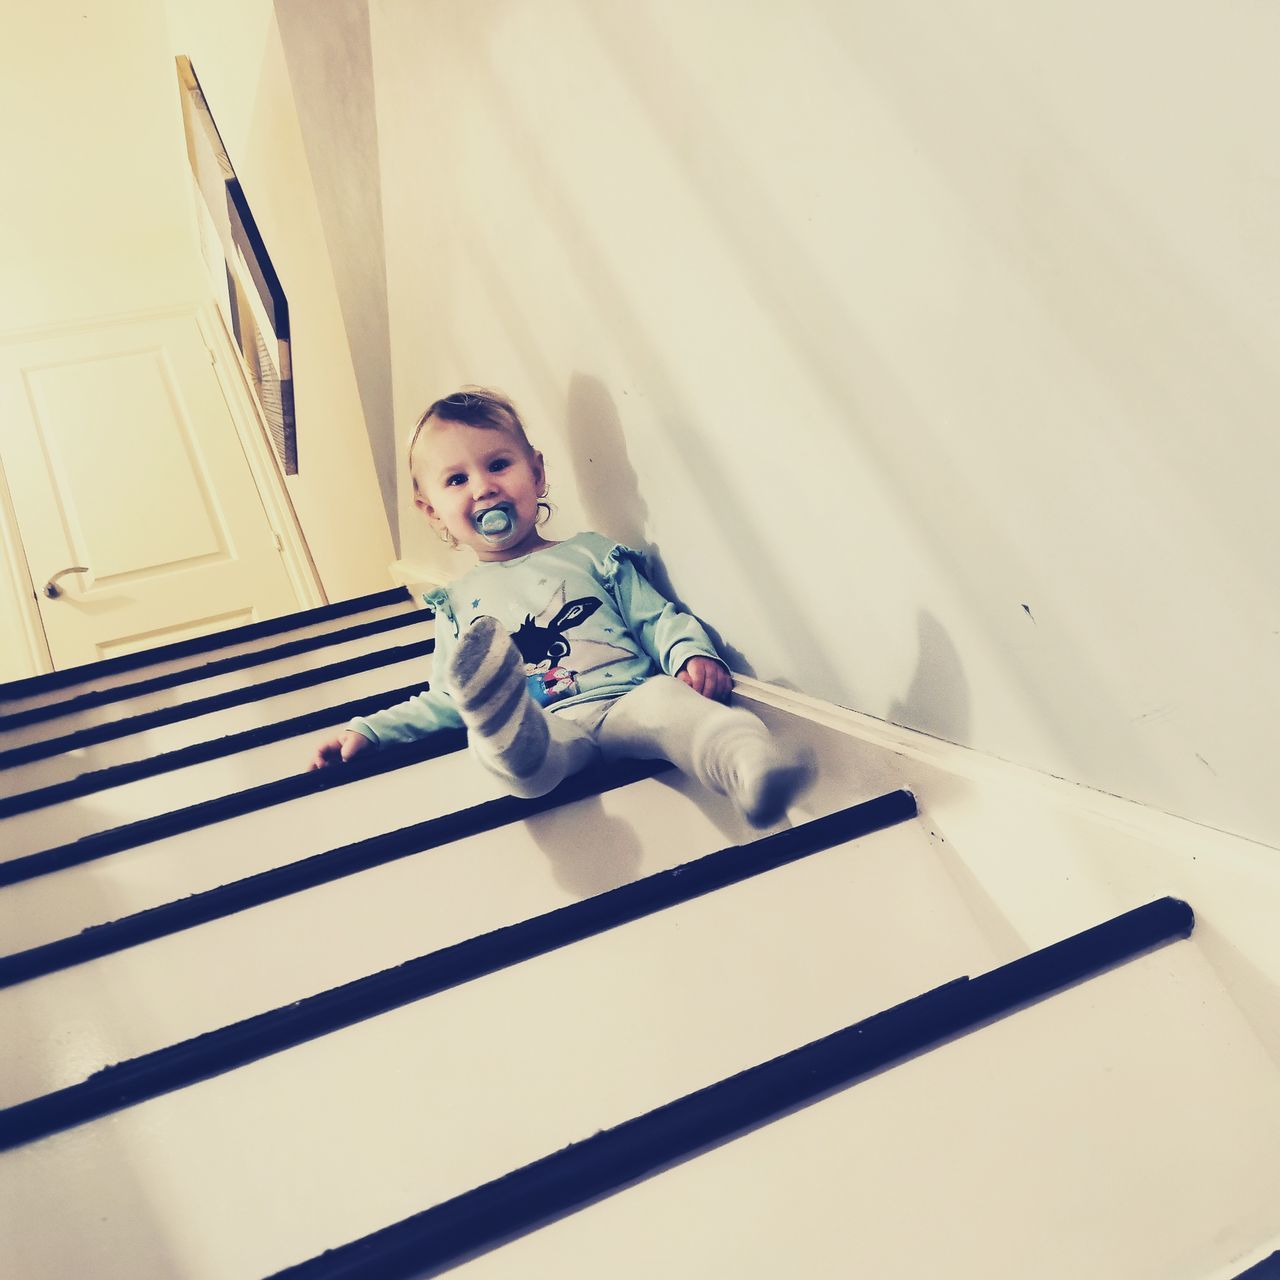 one person, blue, indoors, portrait, adult, emotion, happiness, staircase, smiling, child, looking at camera, men, childhood, lifestyles, architecture, white, full length, casual clothing, person, fun, young adult, striped, clothing, sitting, women